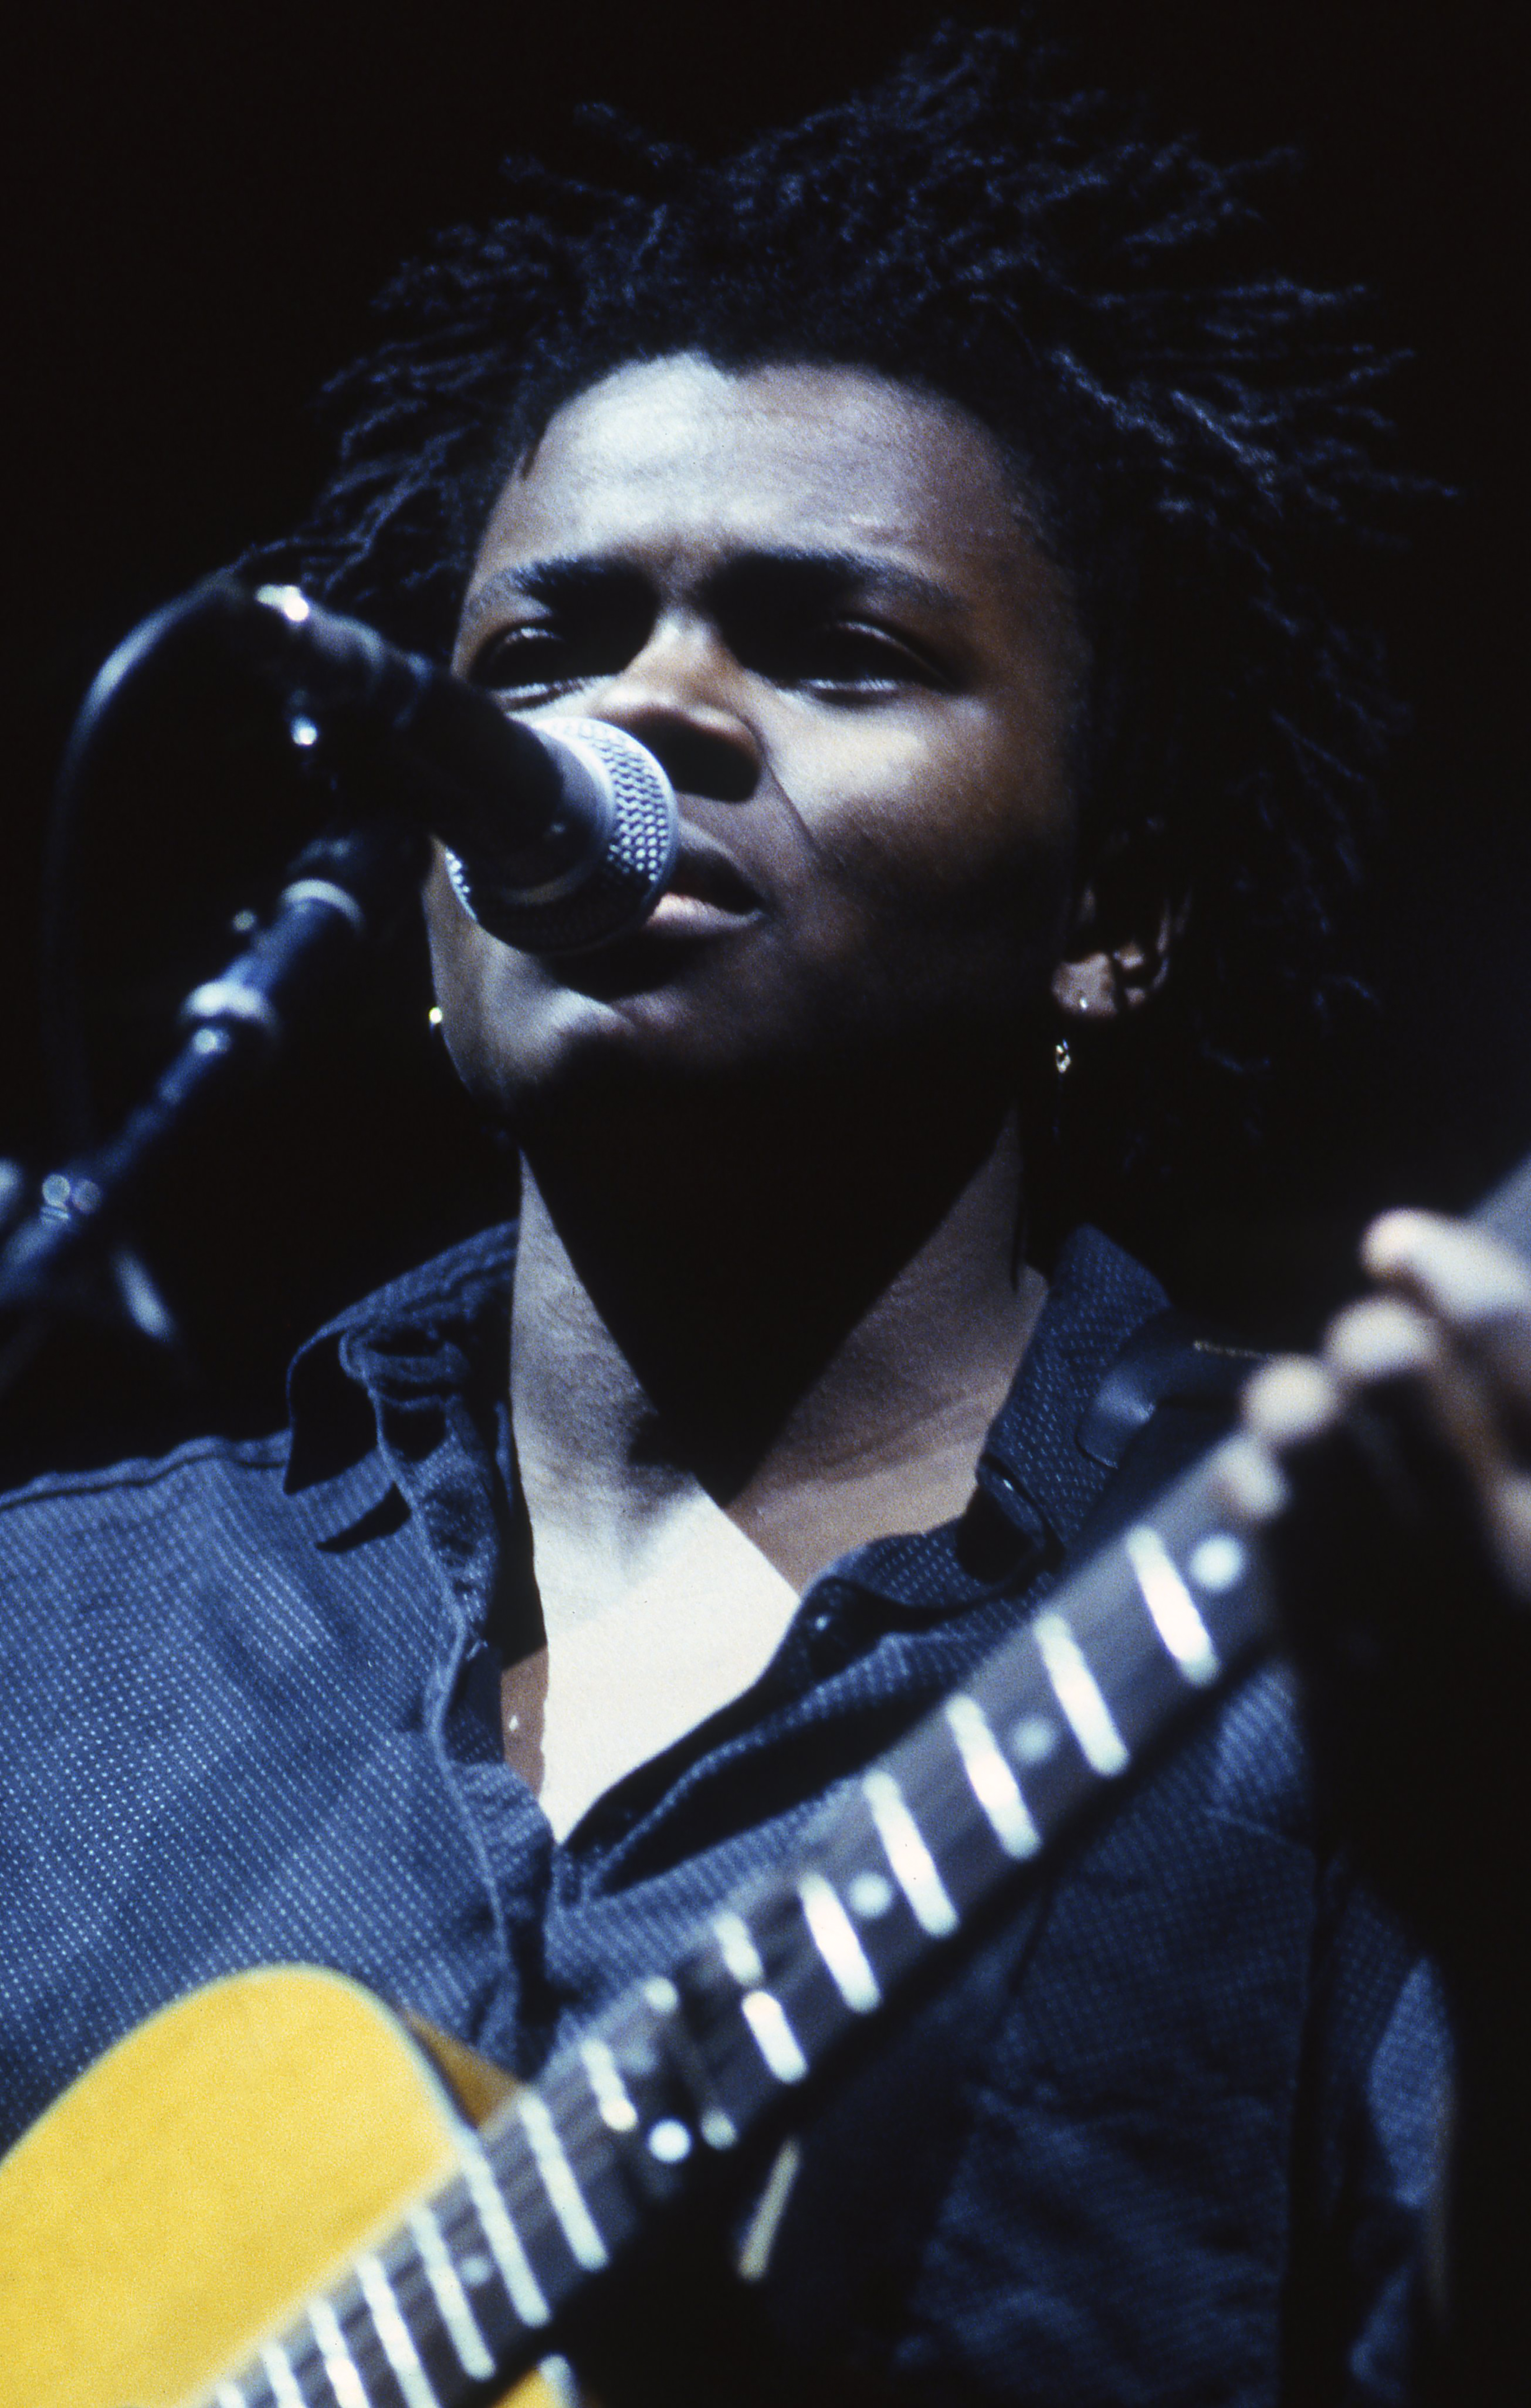 Tracy Chapman performs live at the Los Angeles Memorial Coliseum.